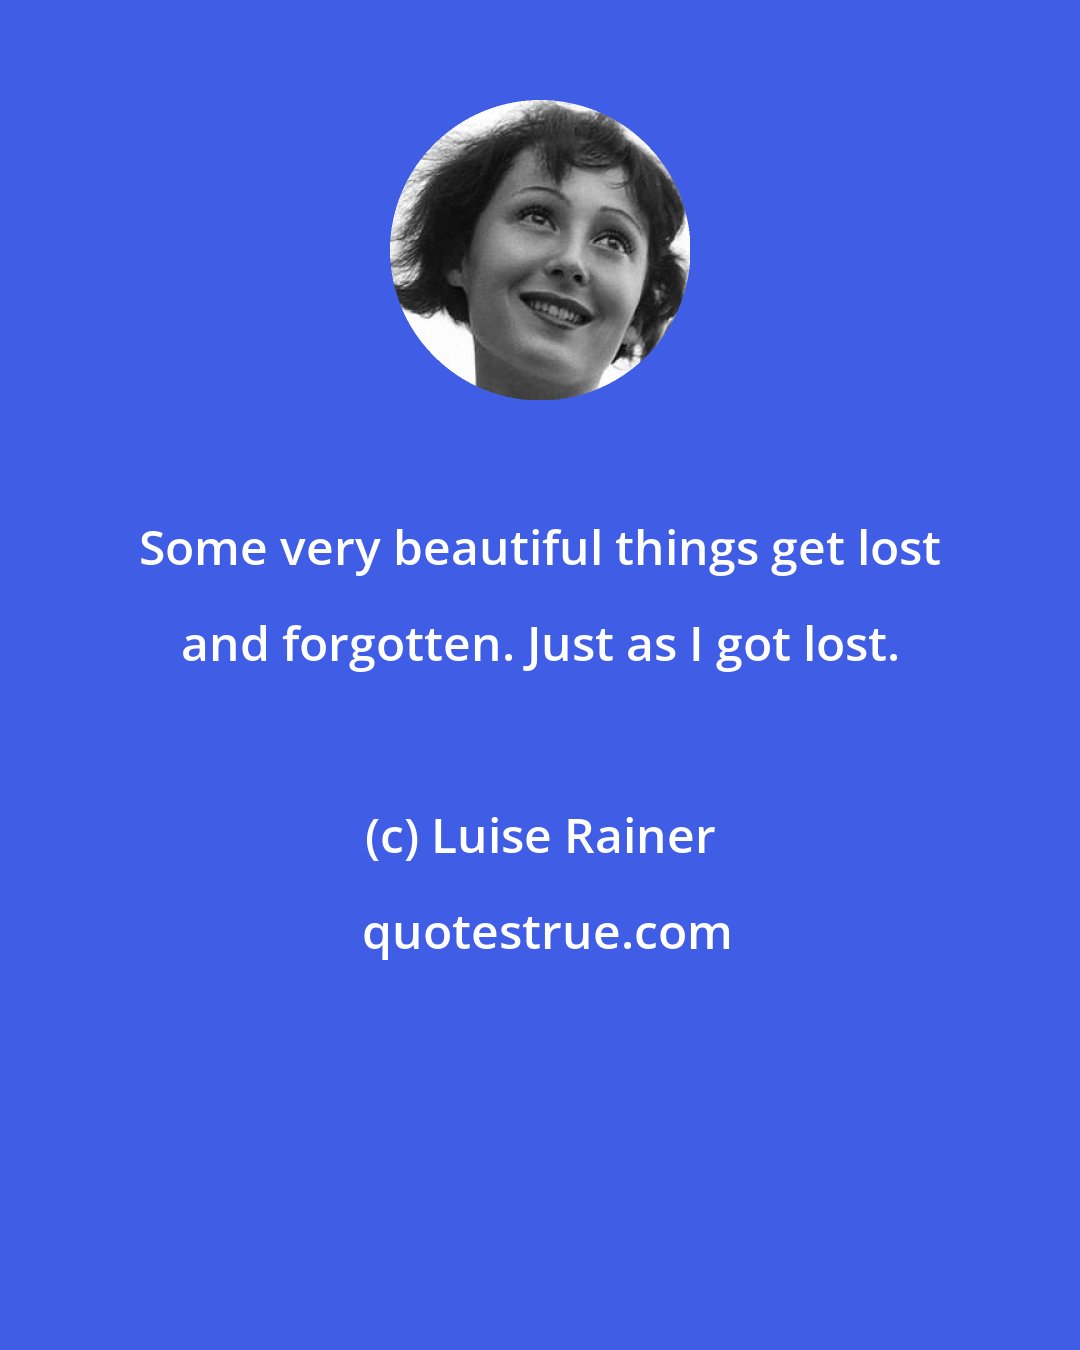 Luise Rainer: Some very beautiful things get lost and forgotten. Just as I got lost.